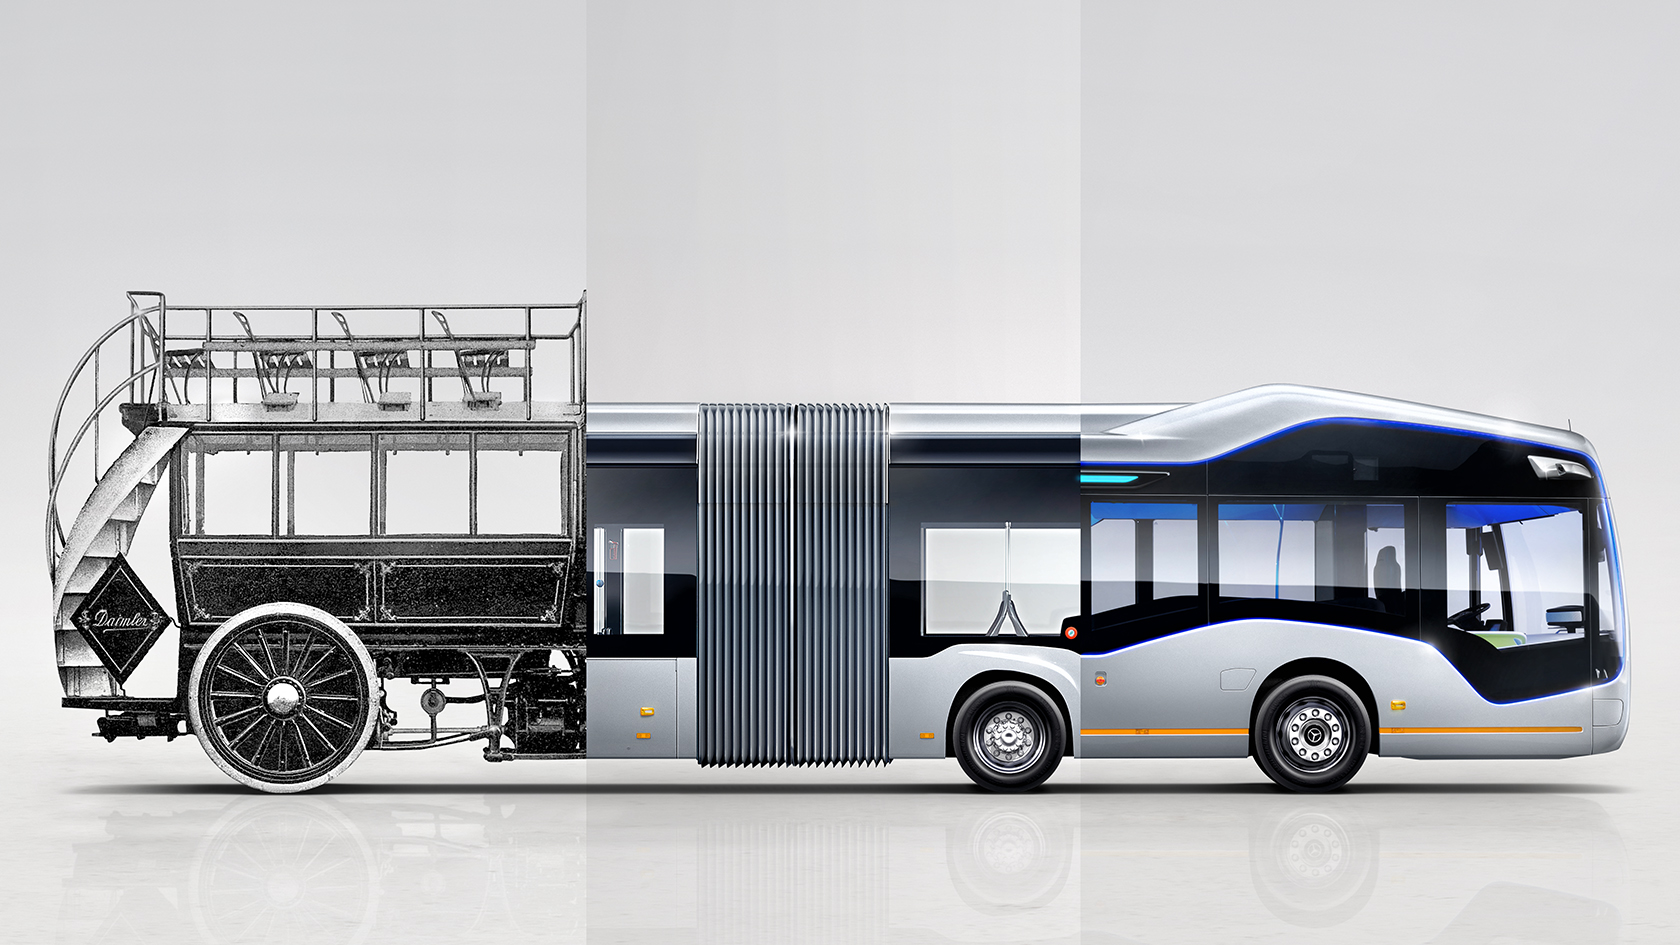 https://www.mercedes-benz-bus.com/content/dam/mbo/markets/common/brand/omnibus-magazin/125-years-buses/images/teaser/stage-125-years-buses.jpg